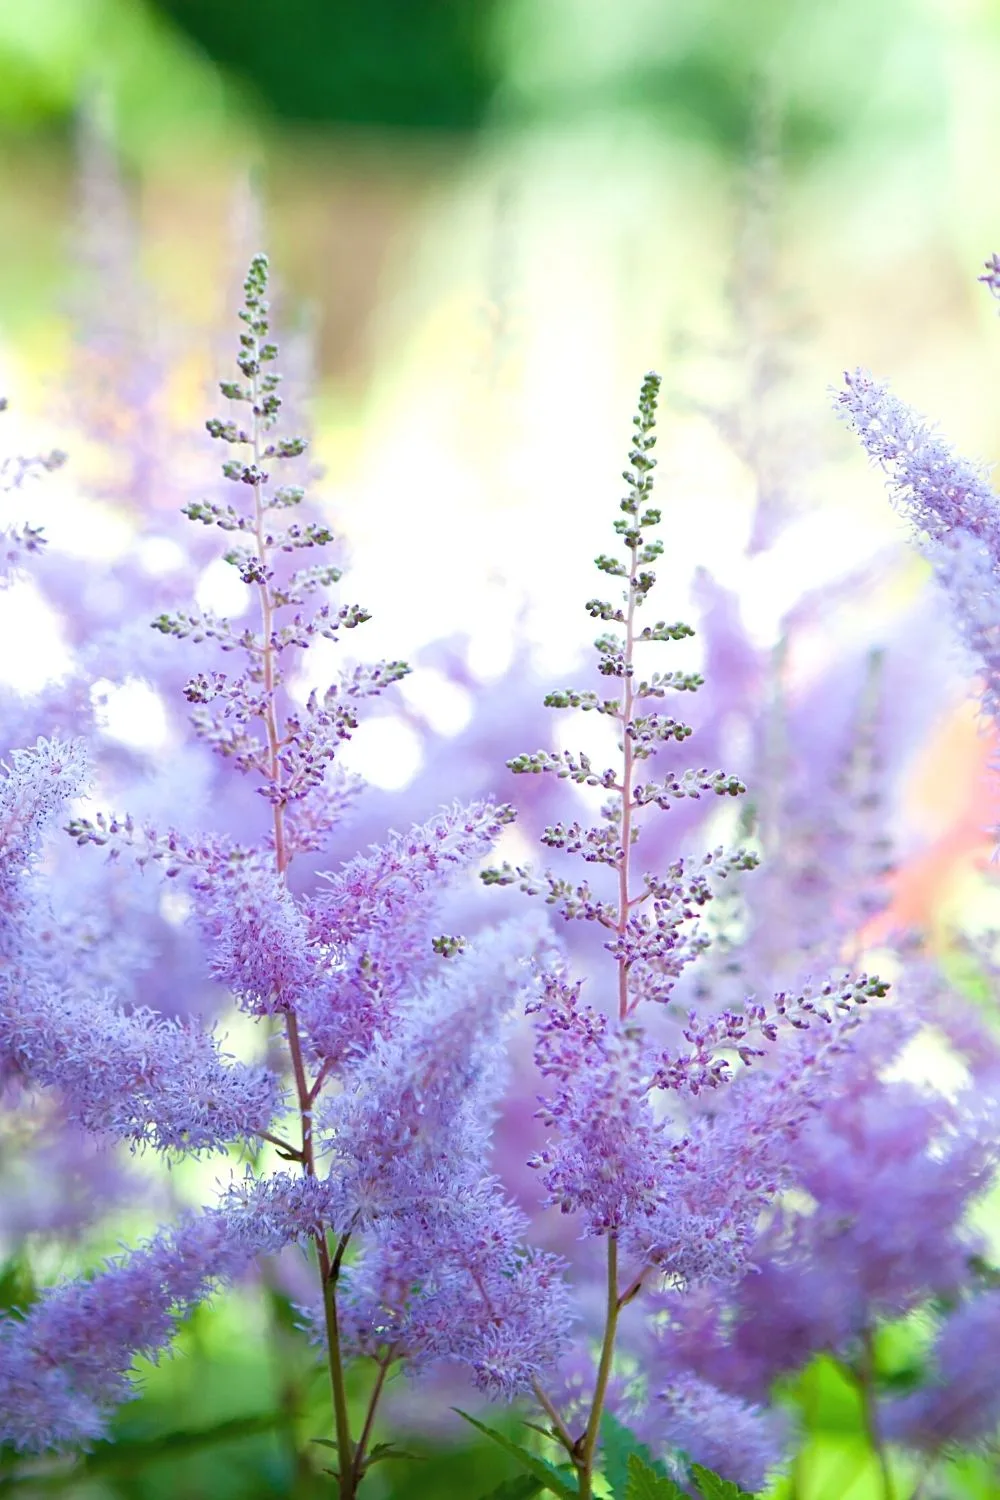 Astilbe is a plant that thrives in 1-2 hours of indirect sunlight, which the northwest-facing gardens are known to receive